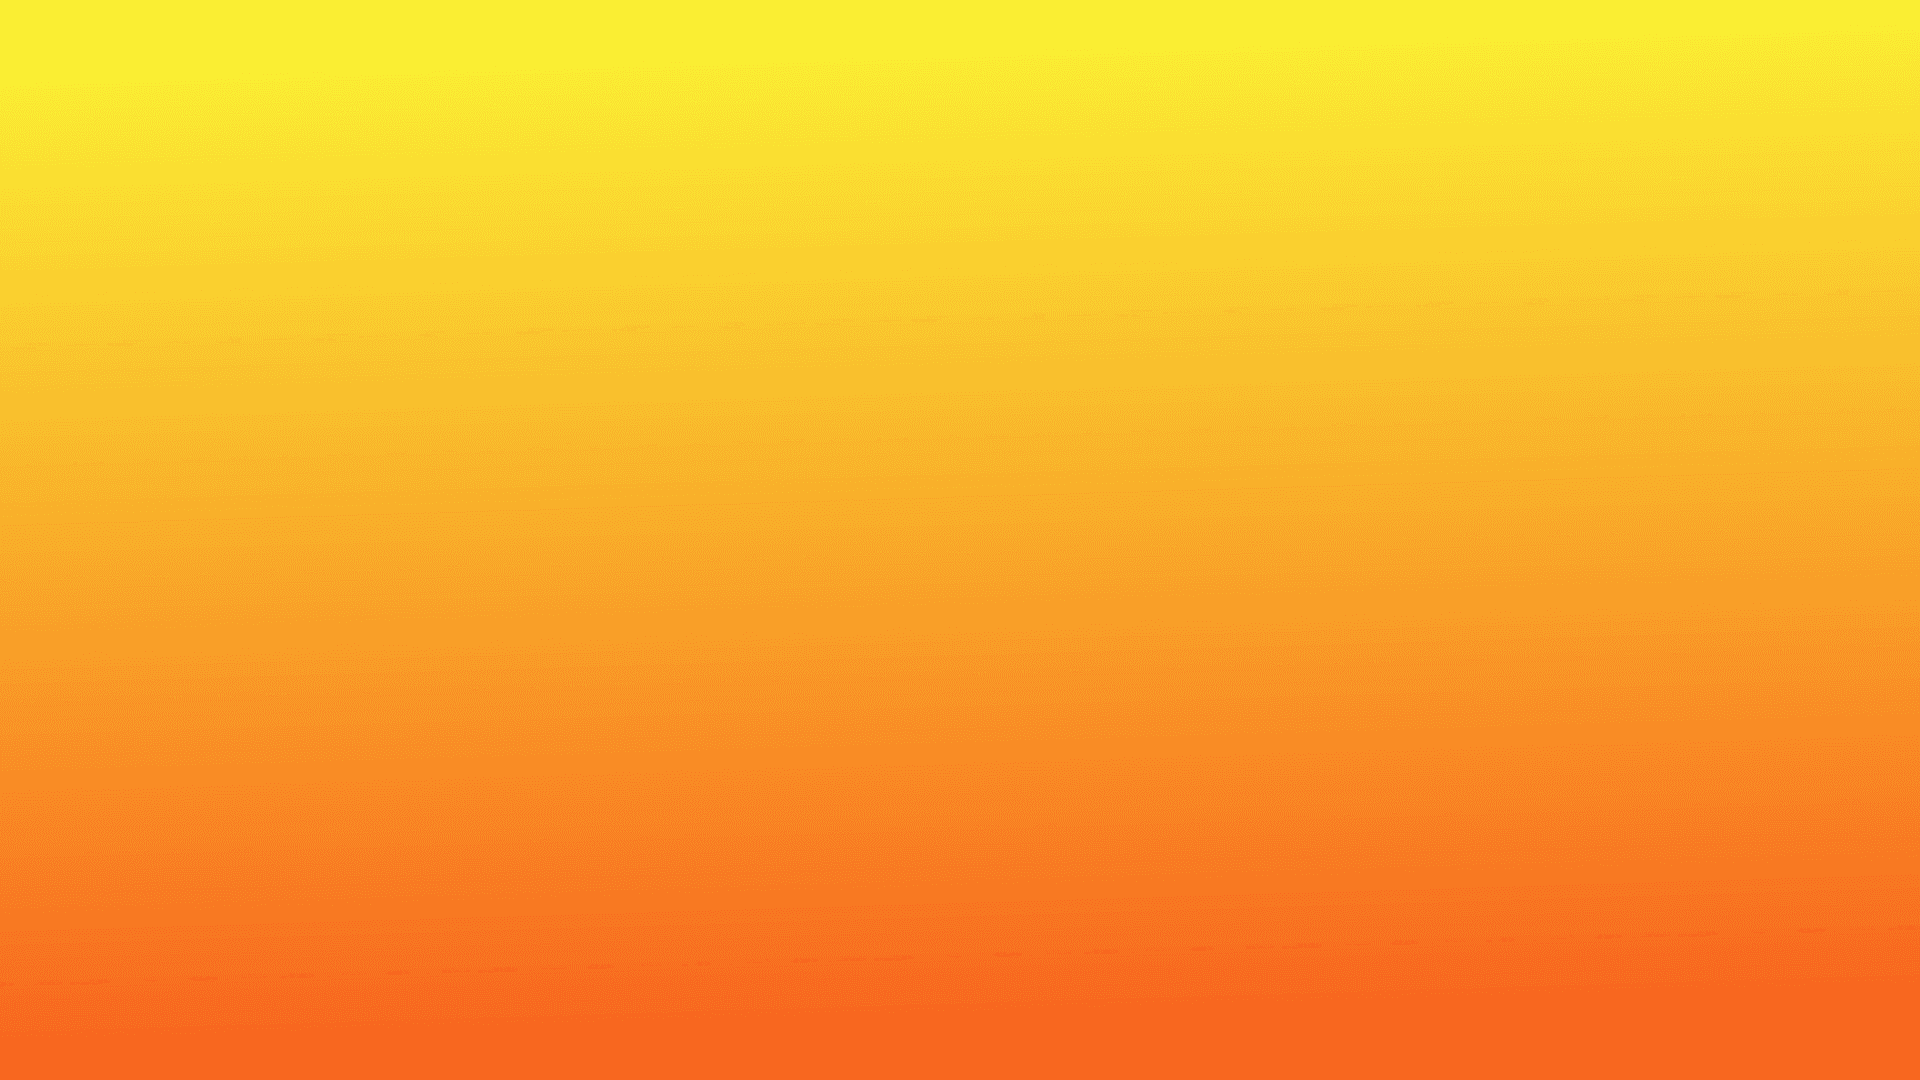 Download A Yellow And Orange Background With A Sun 